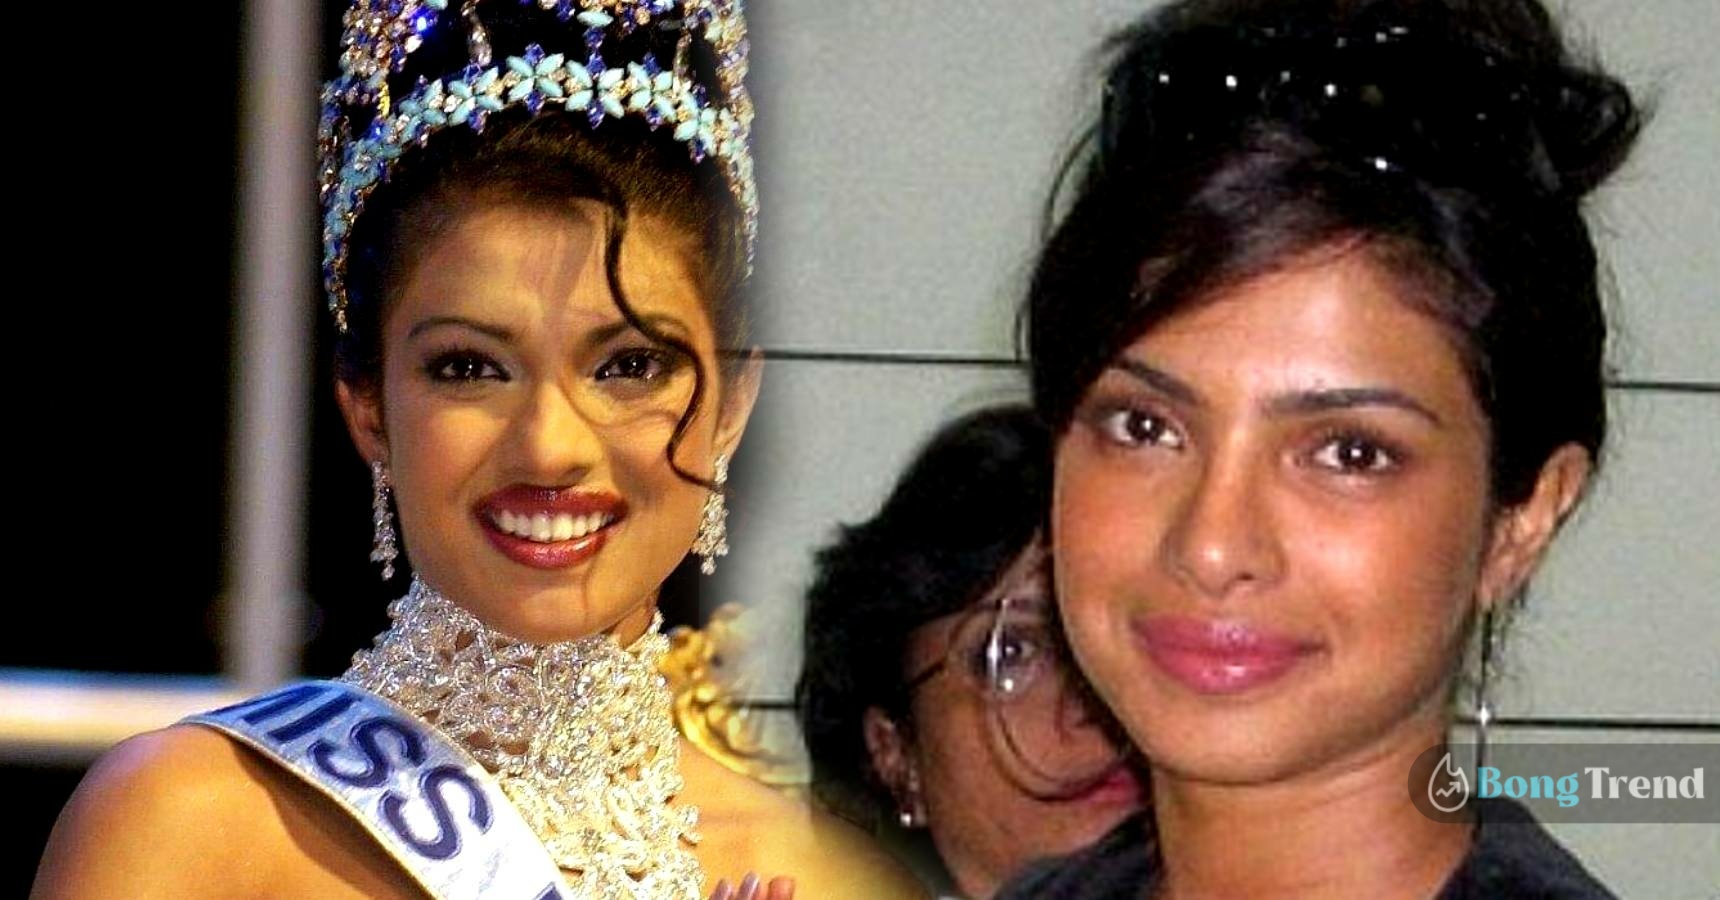 Former Miss Barbados Leilani accused Priyanka Chopra about Miss World competition